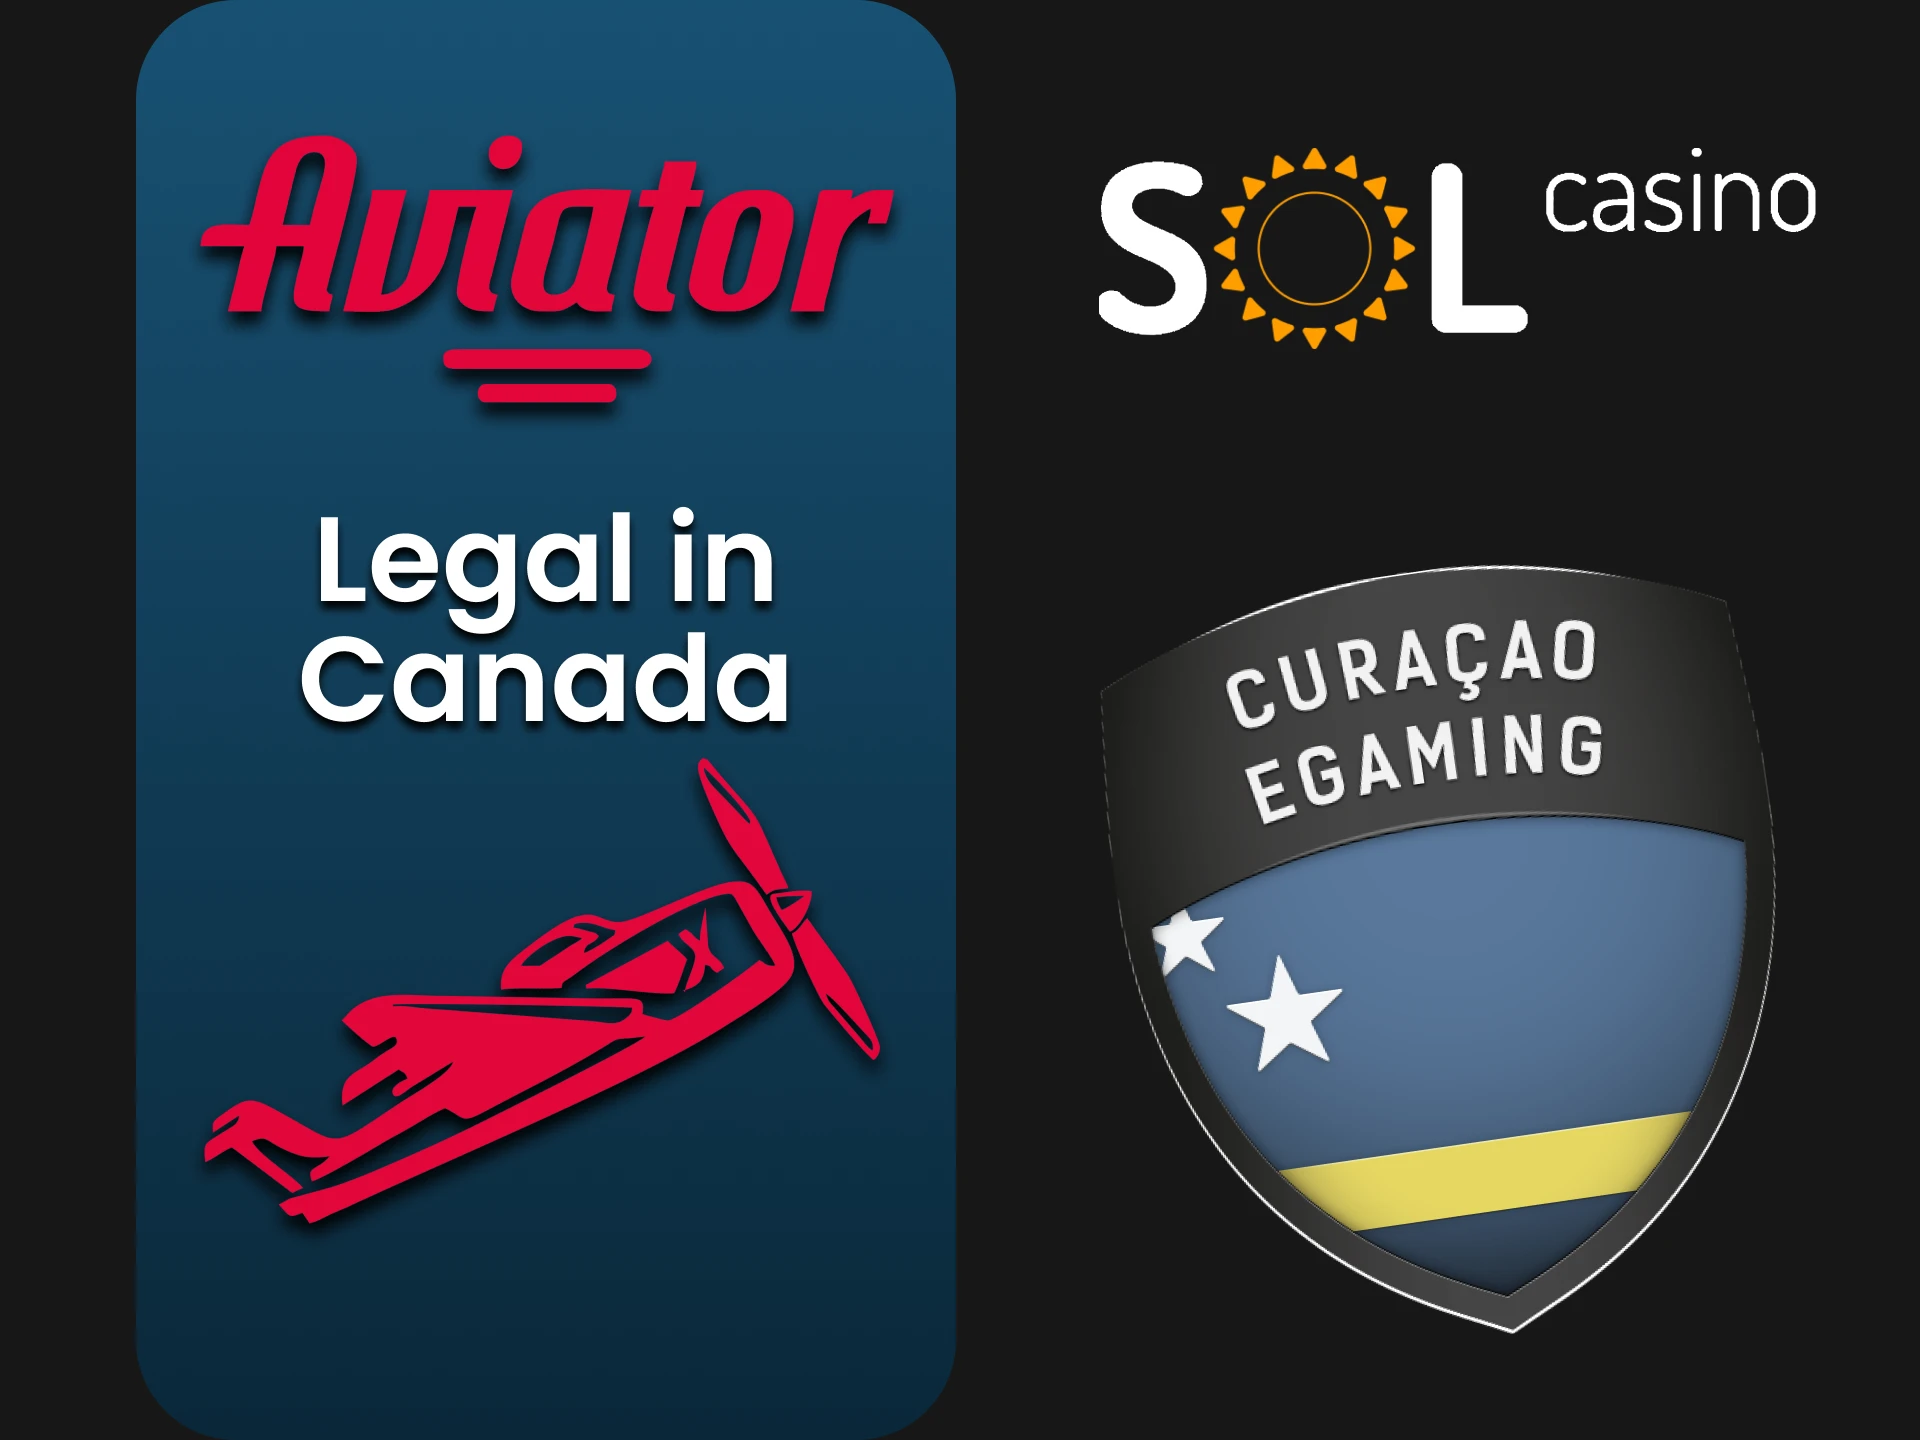 Sol Casino has a license for the Aviator game.